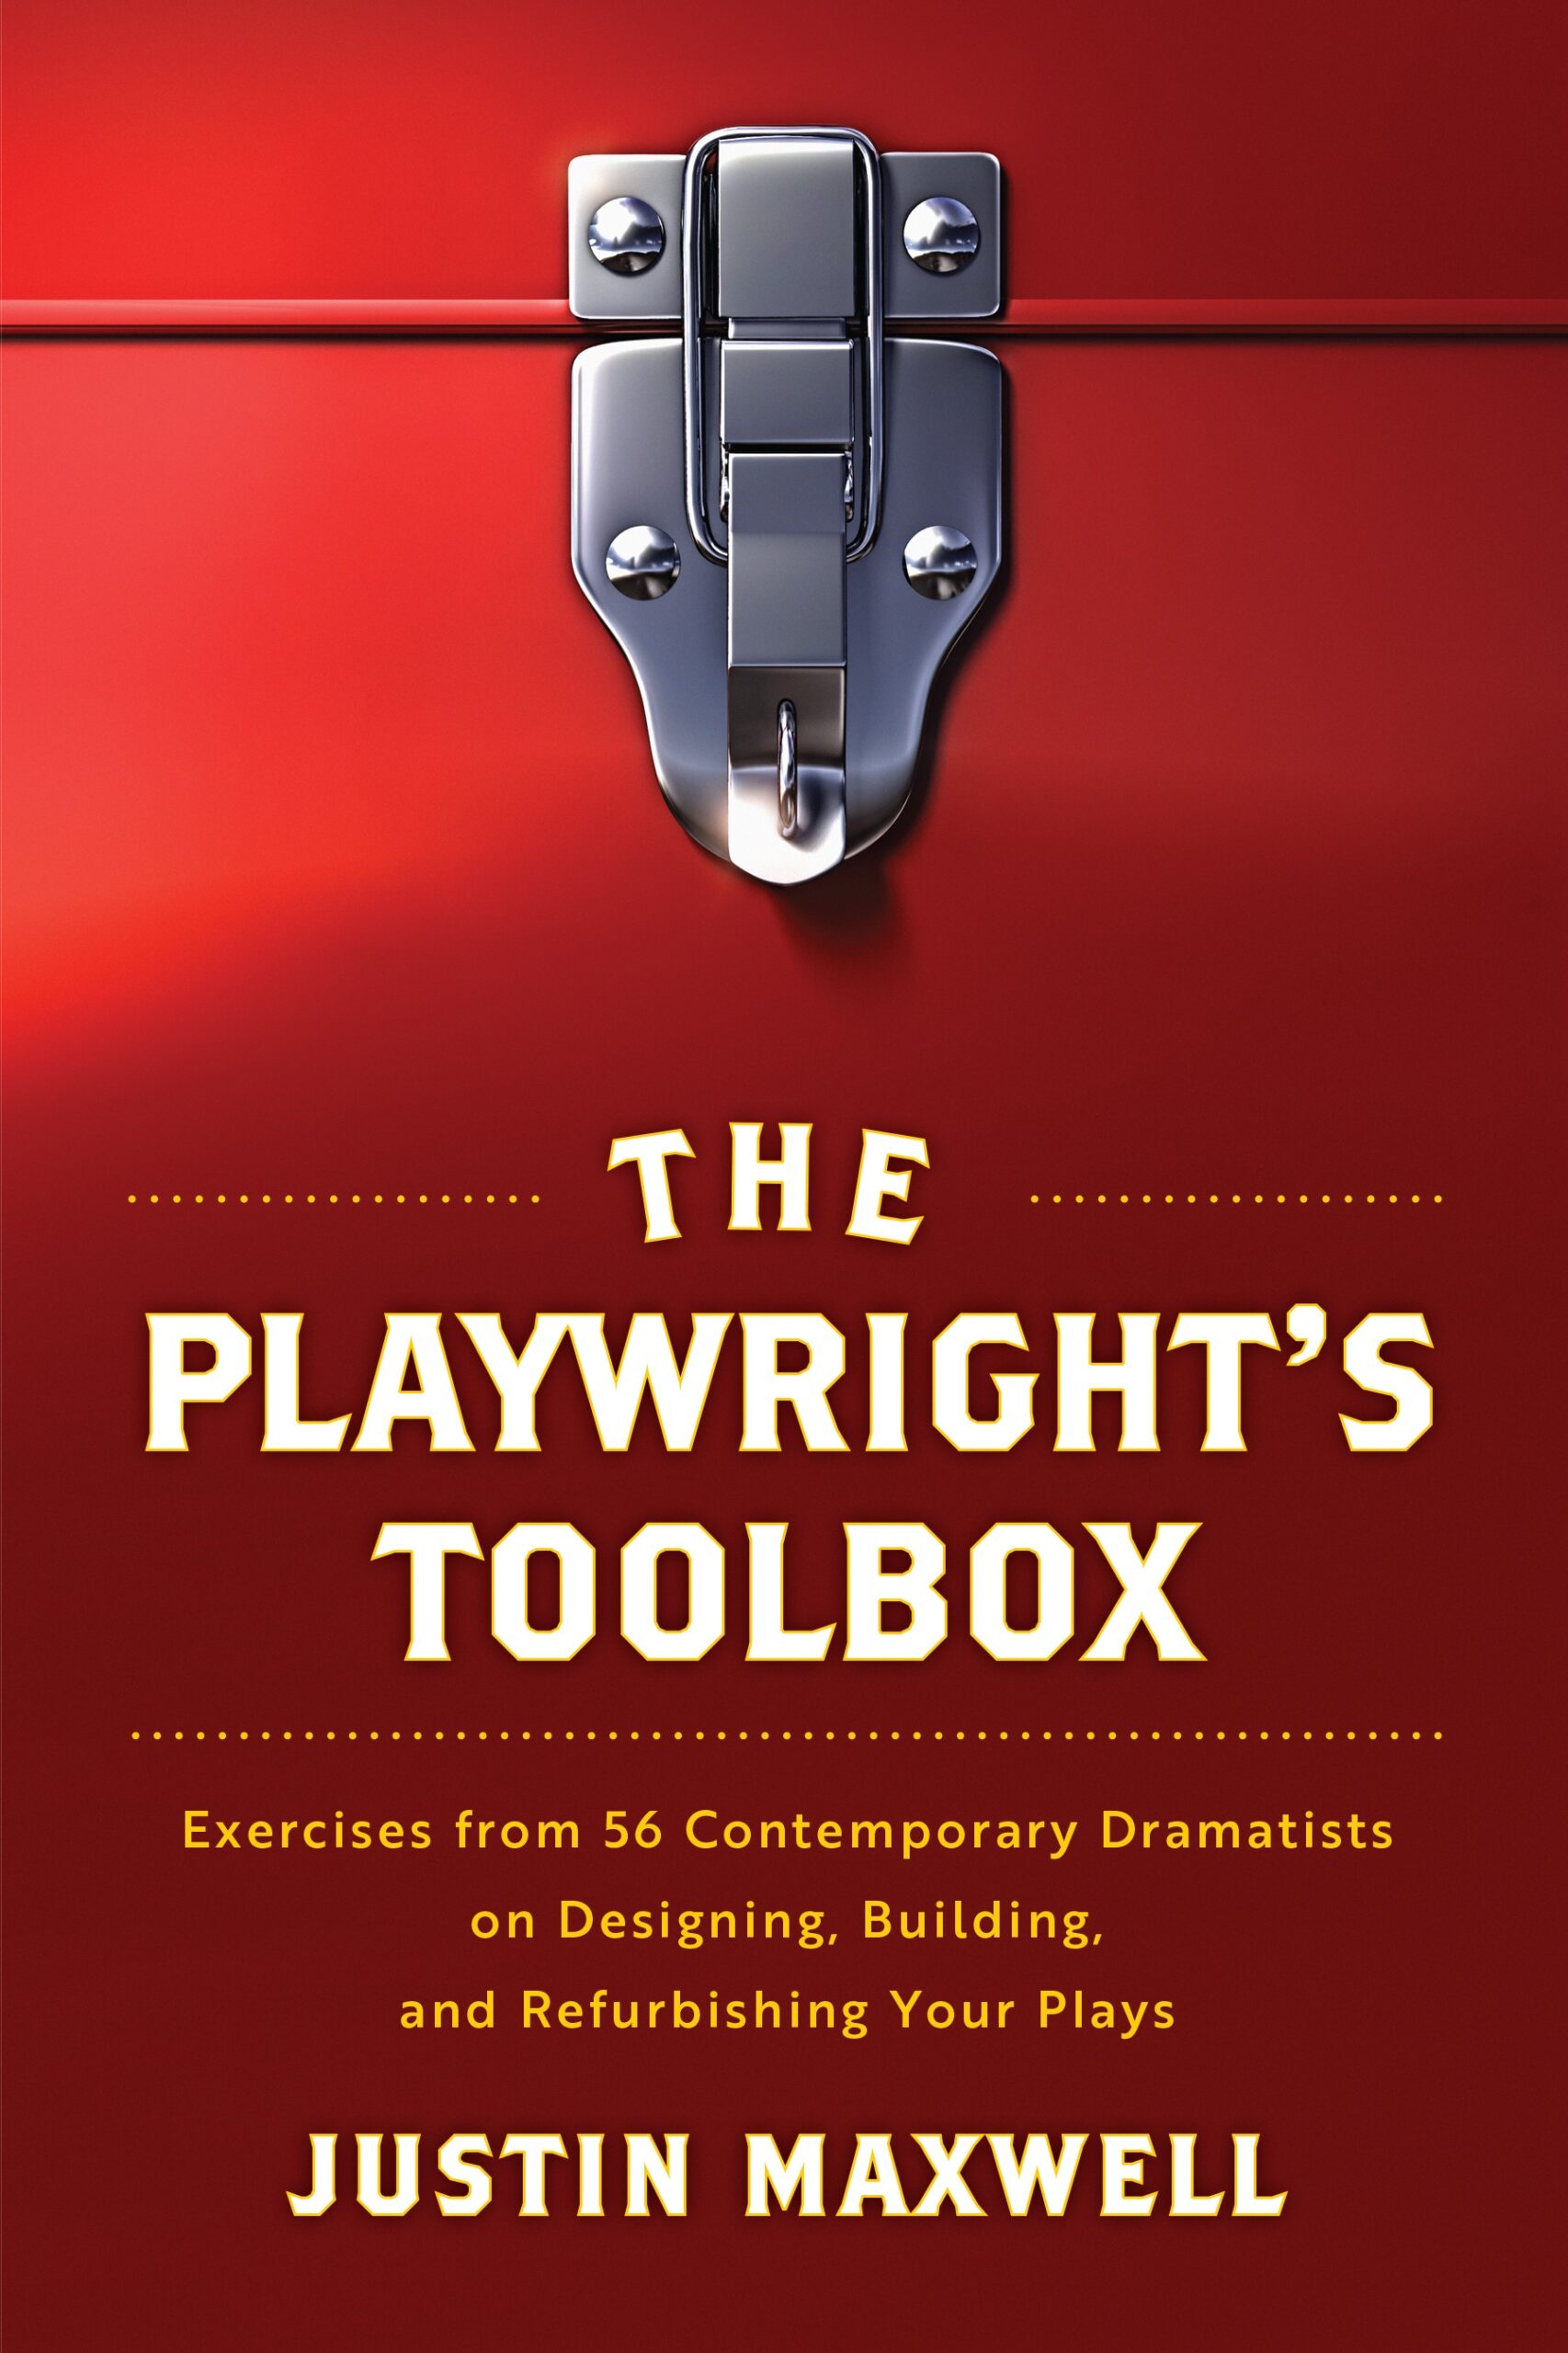 A red book cover with locking clasp pictured on top above the book title "The Playwright's Toolbox" by Justin Maxwell.